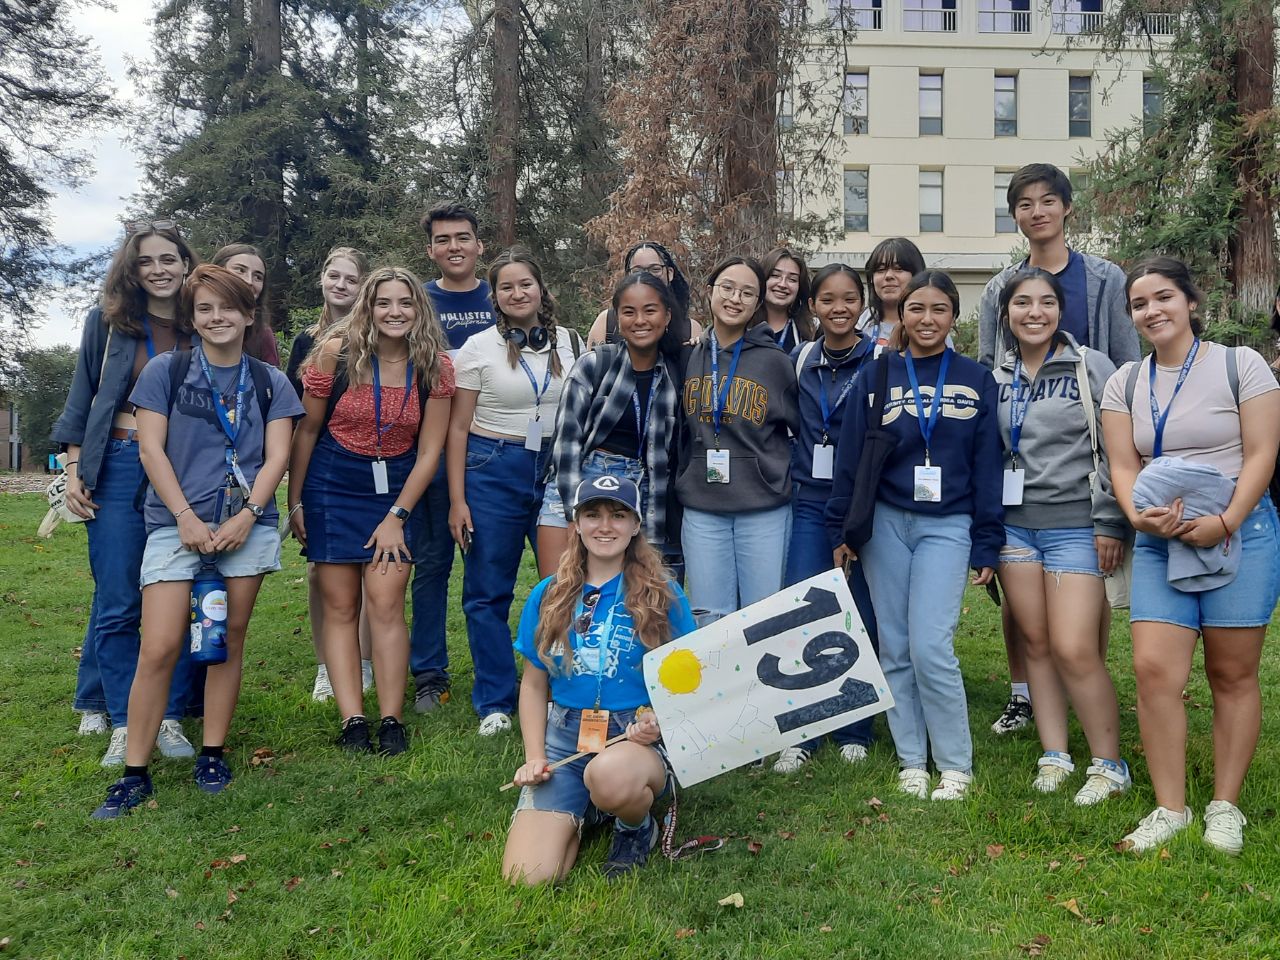 A group of UC Davis students, headed by Political Science major Ryleigh Praker, poses in the Arboretum during Aggie Orientation 2022.